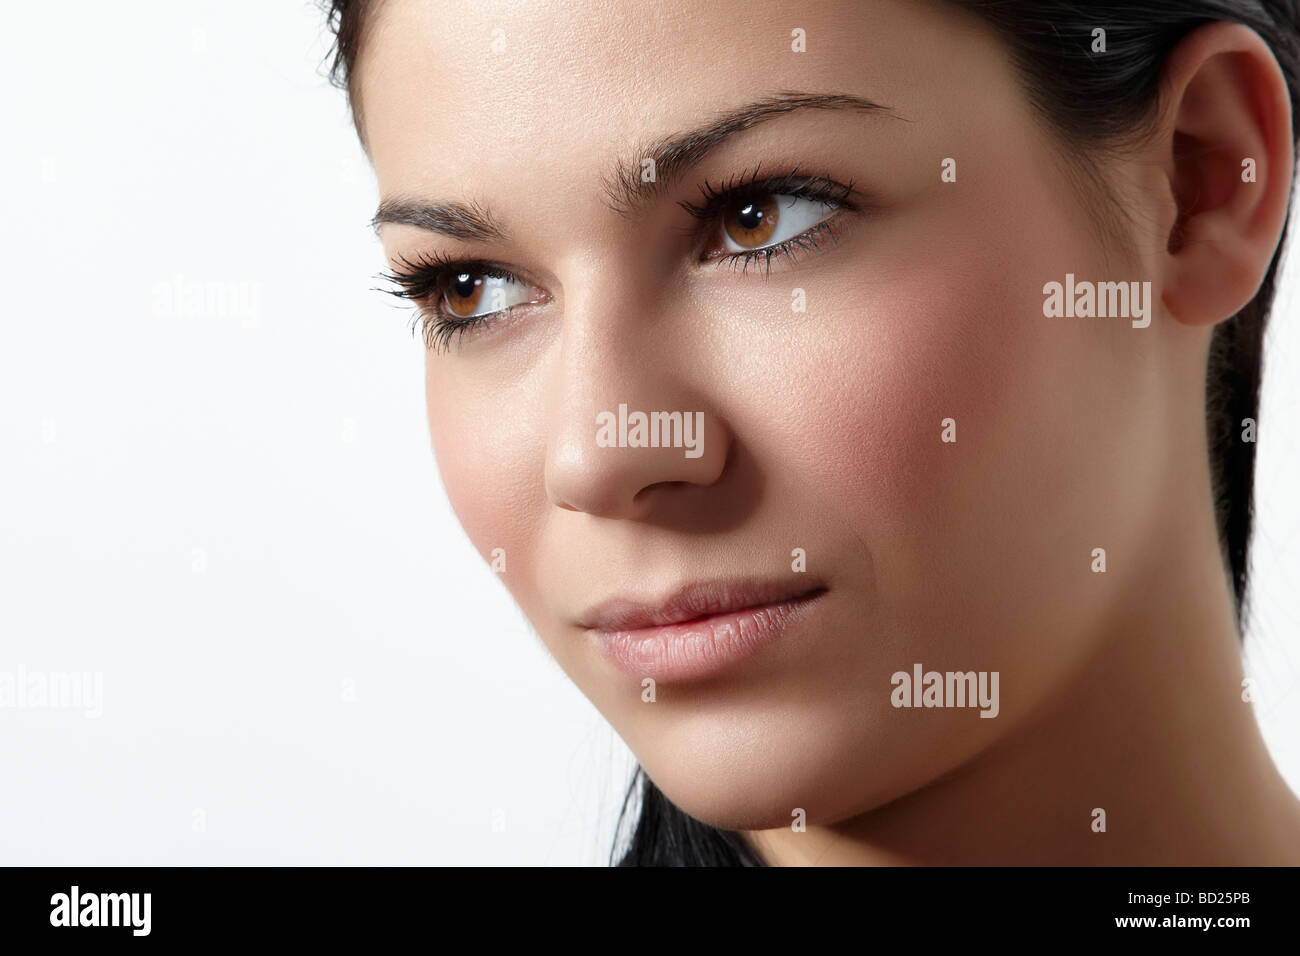 Side portrait of a young woman Stock Photo